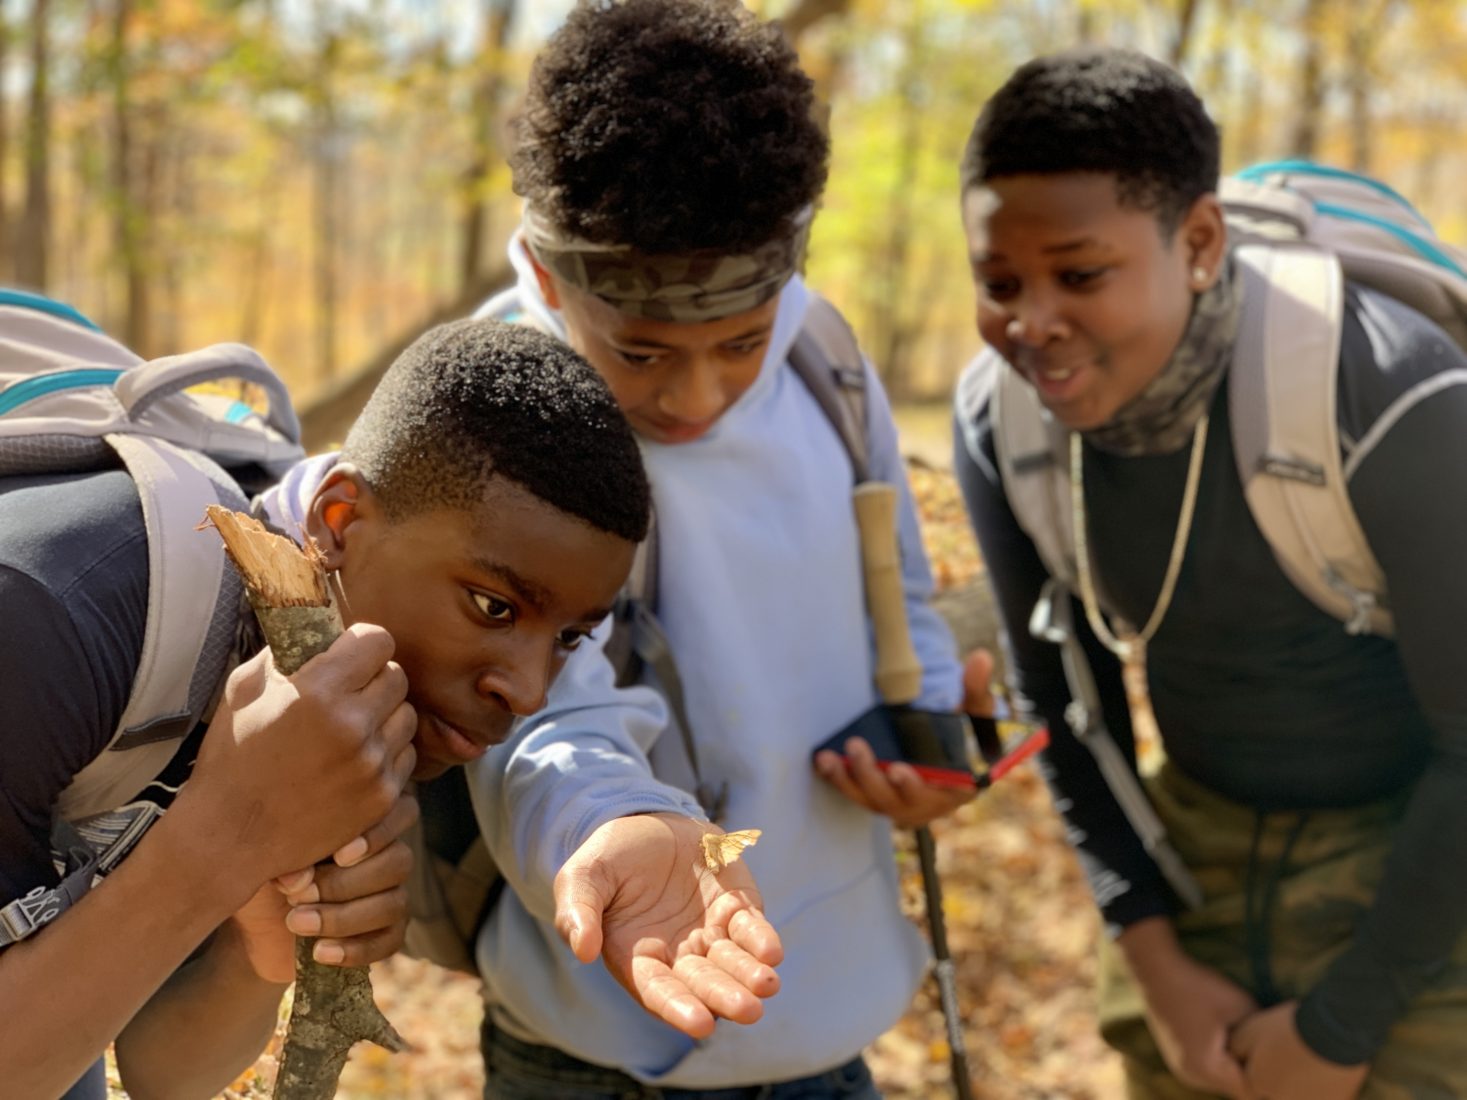 Found in the Woods: What City Kids Learn in the Wilderness